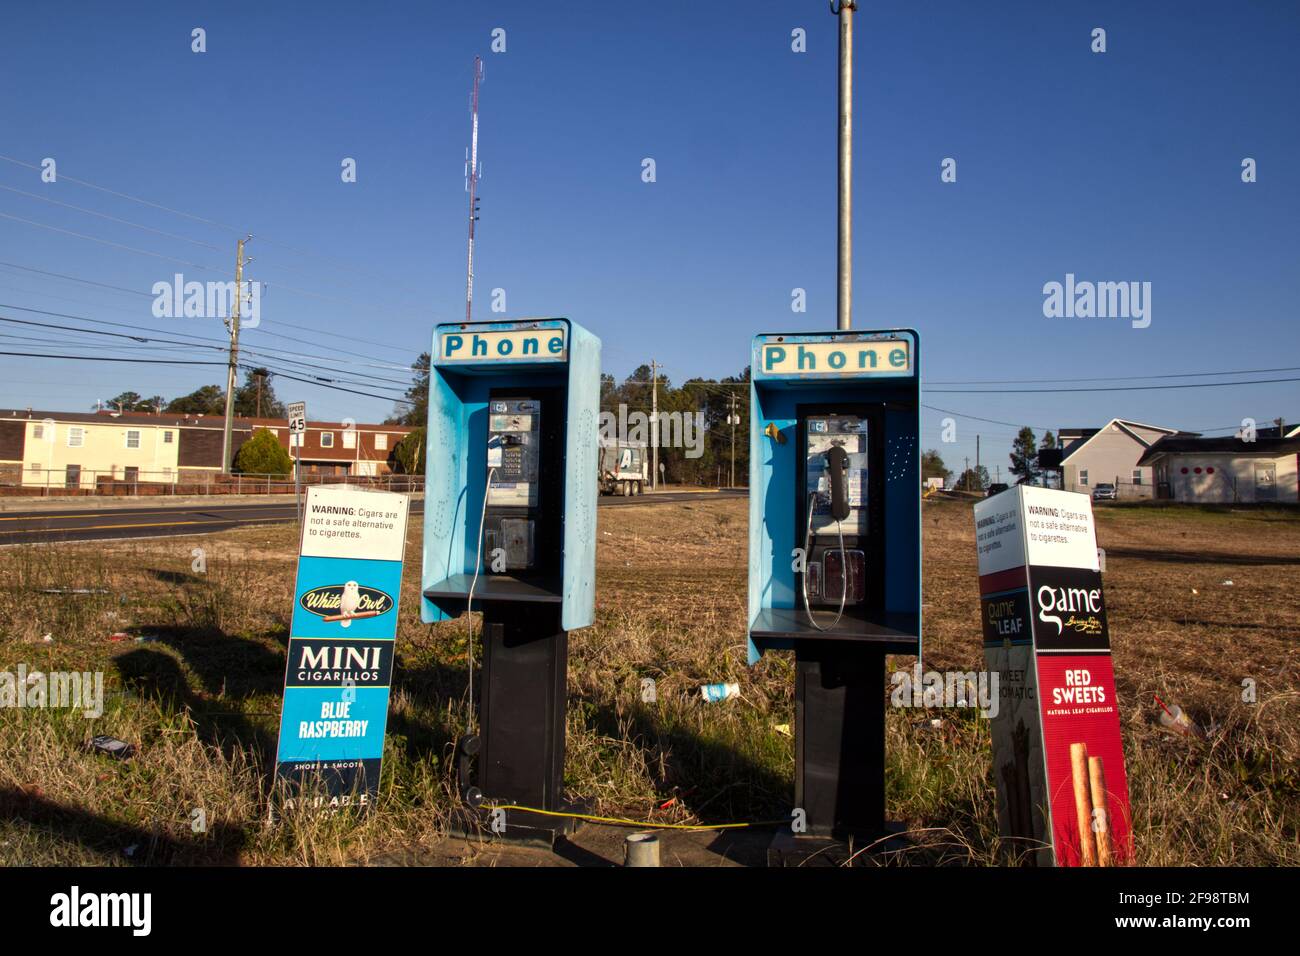 Augusta, Ga USA - 02 24 21: Old 80’s style coin operated payphone Bellsouth Tobacco ads and litter and waste on the ground in an urban area Stock Photo